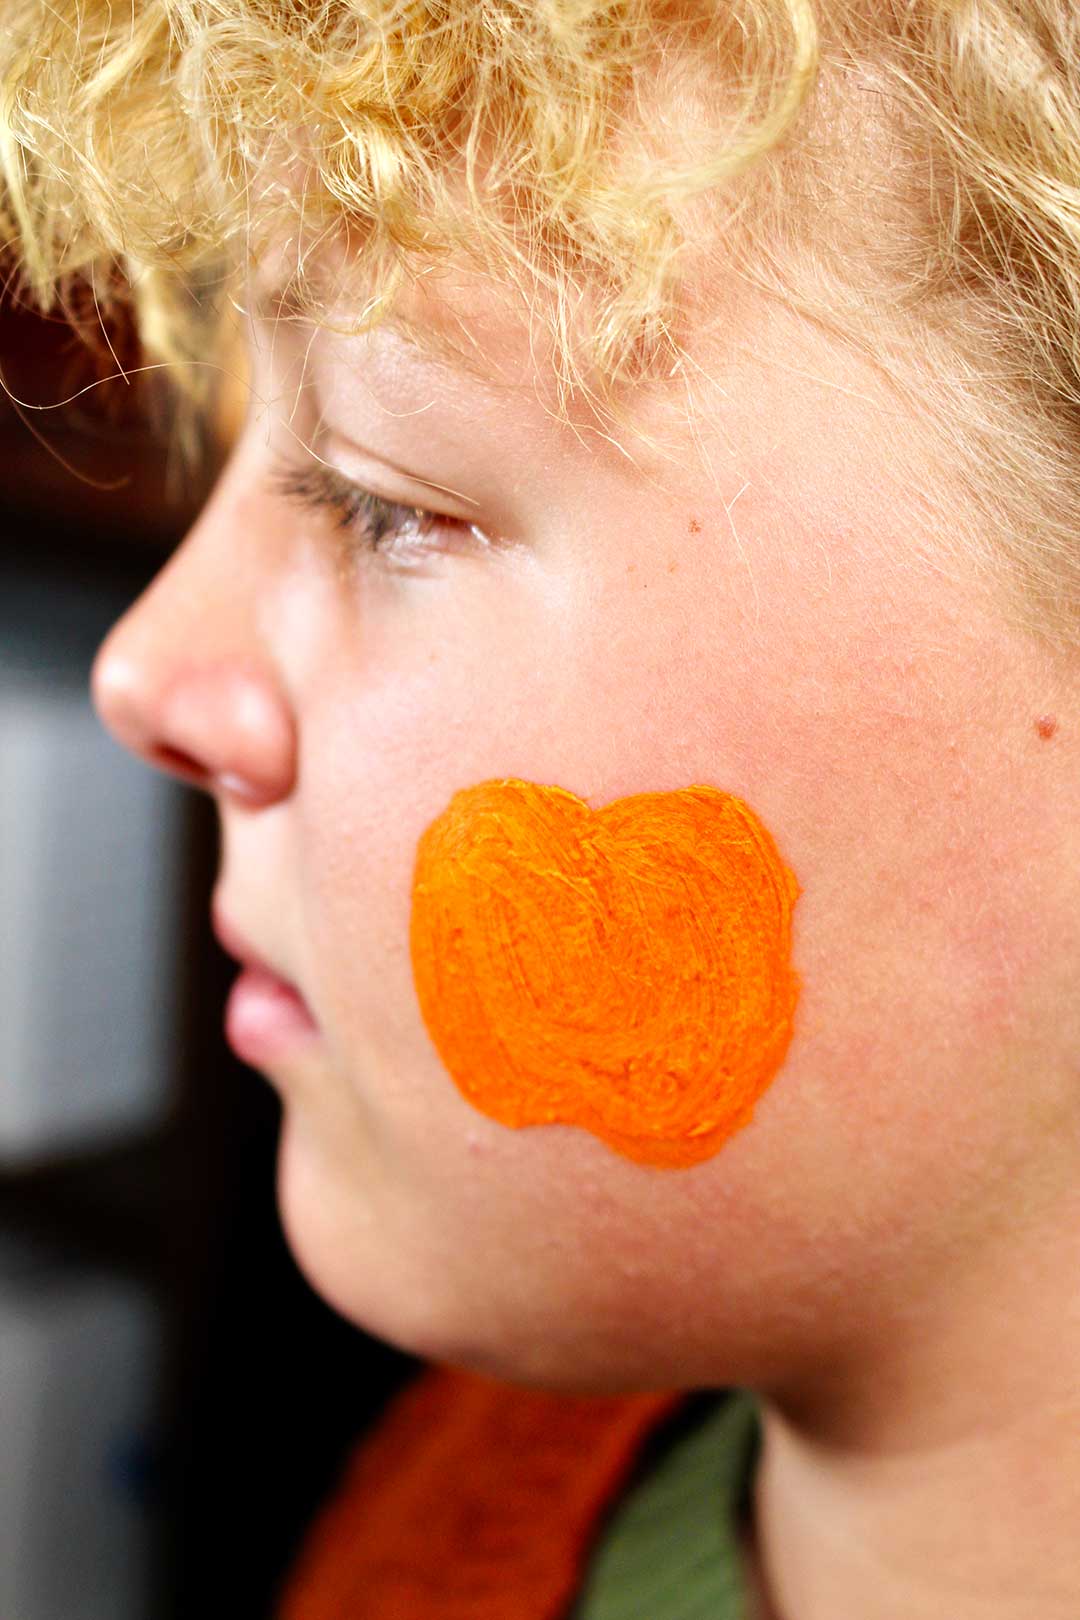 Profile of girls face with orange face paint outline of a pumpkin on cheek.